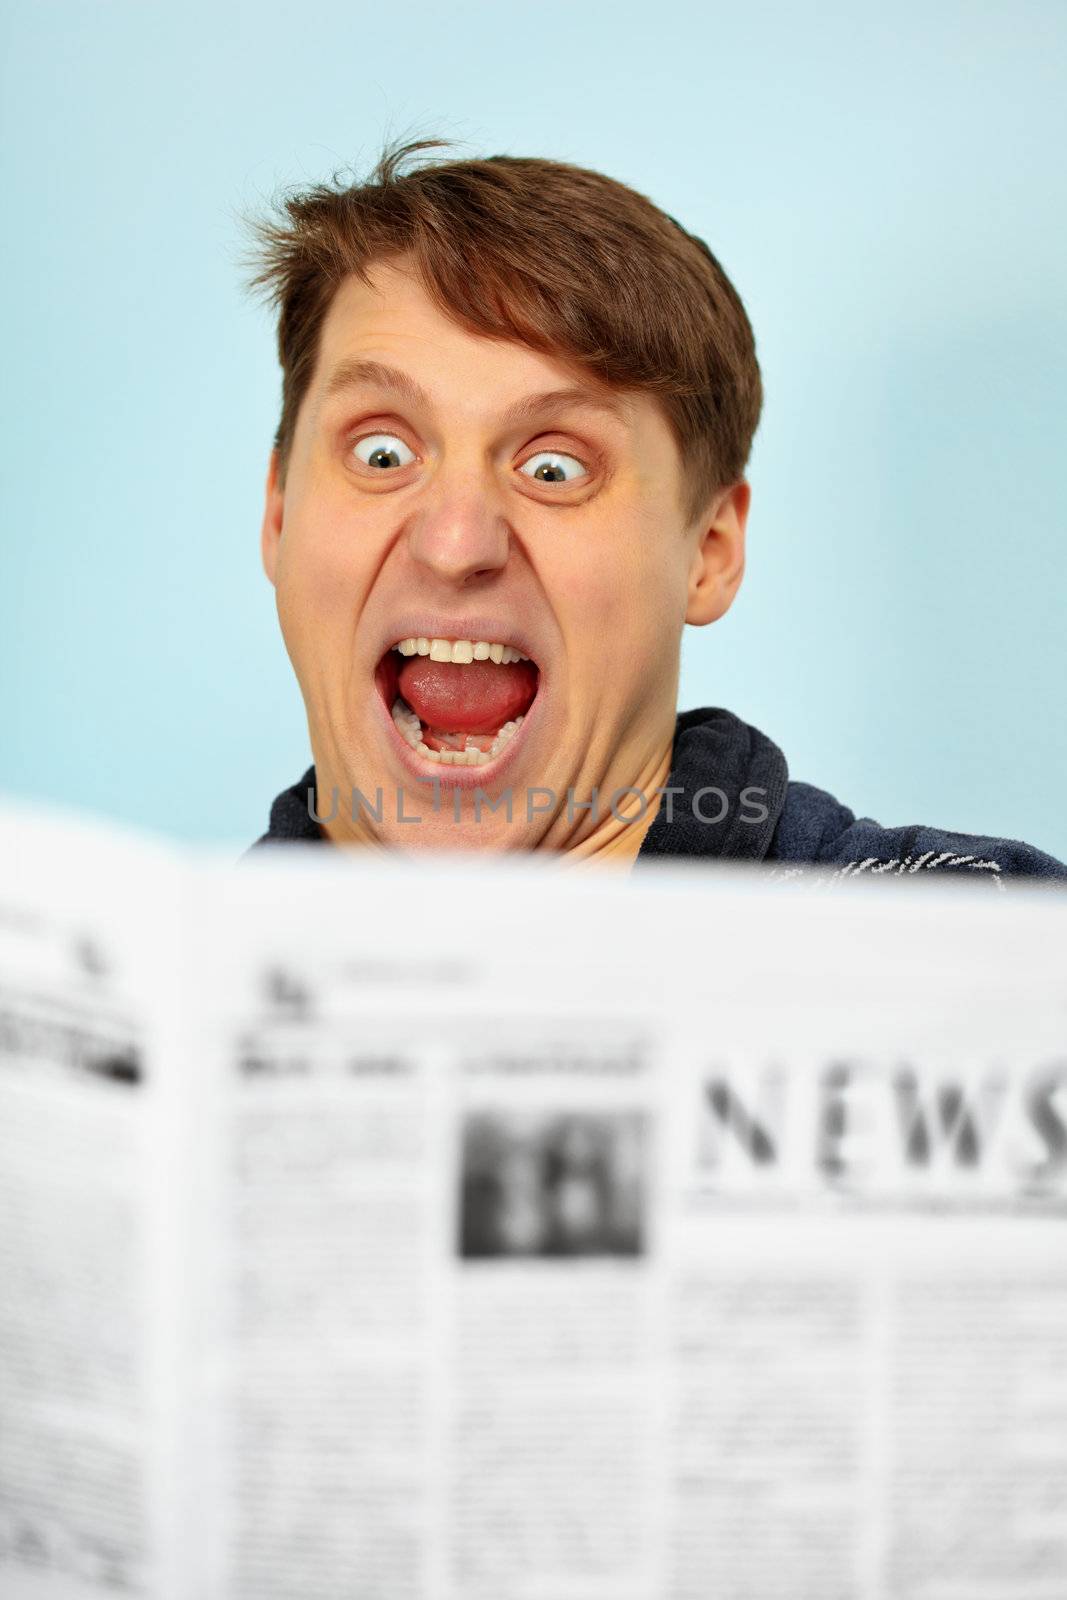 Man shocked by bad news from the newspaper